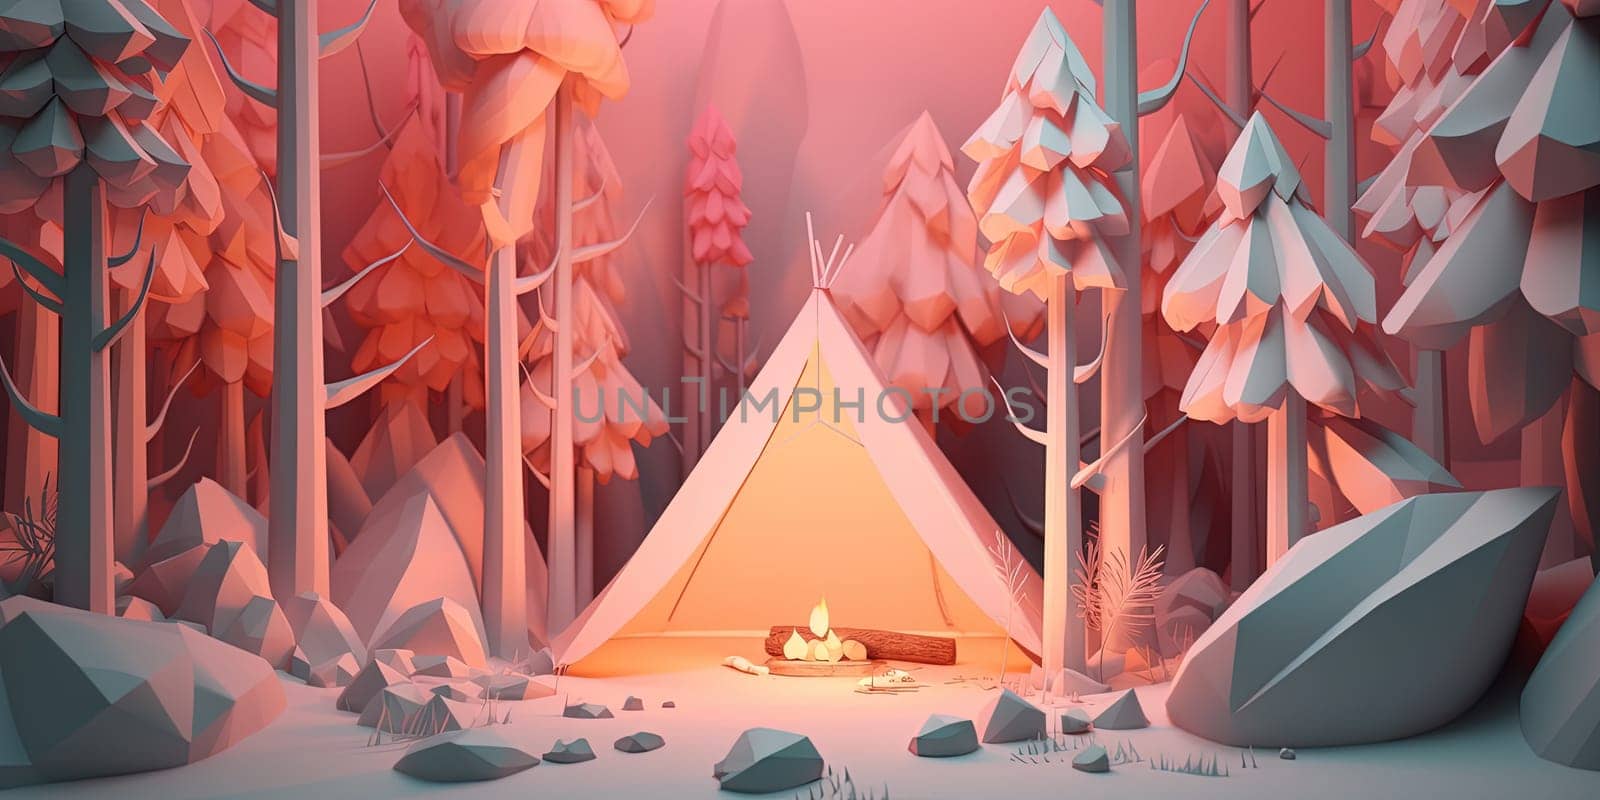 3D Illustration Tent In Forest And Bonfire At Night by tan4ikk1